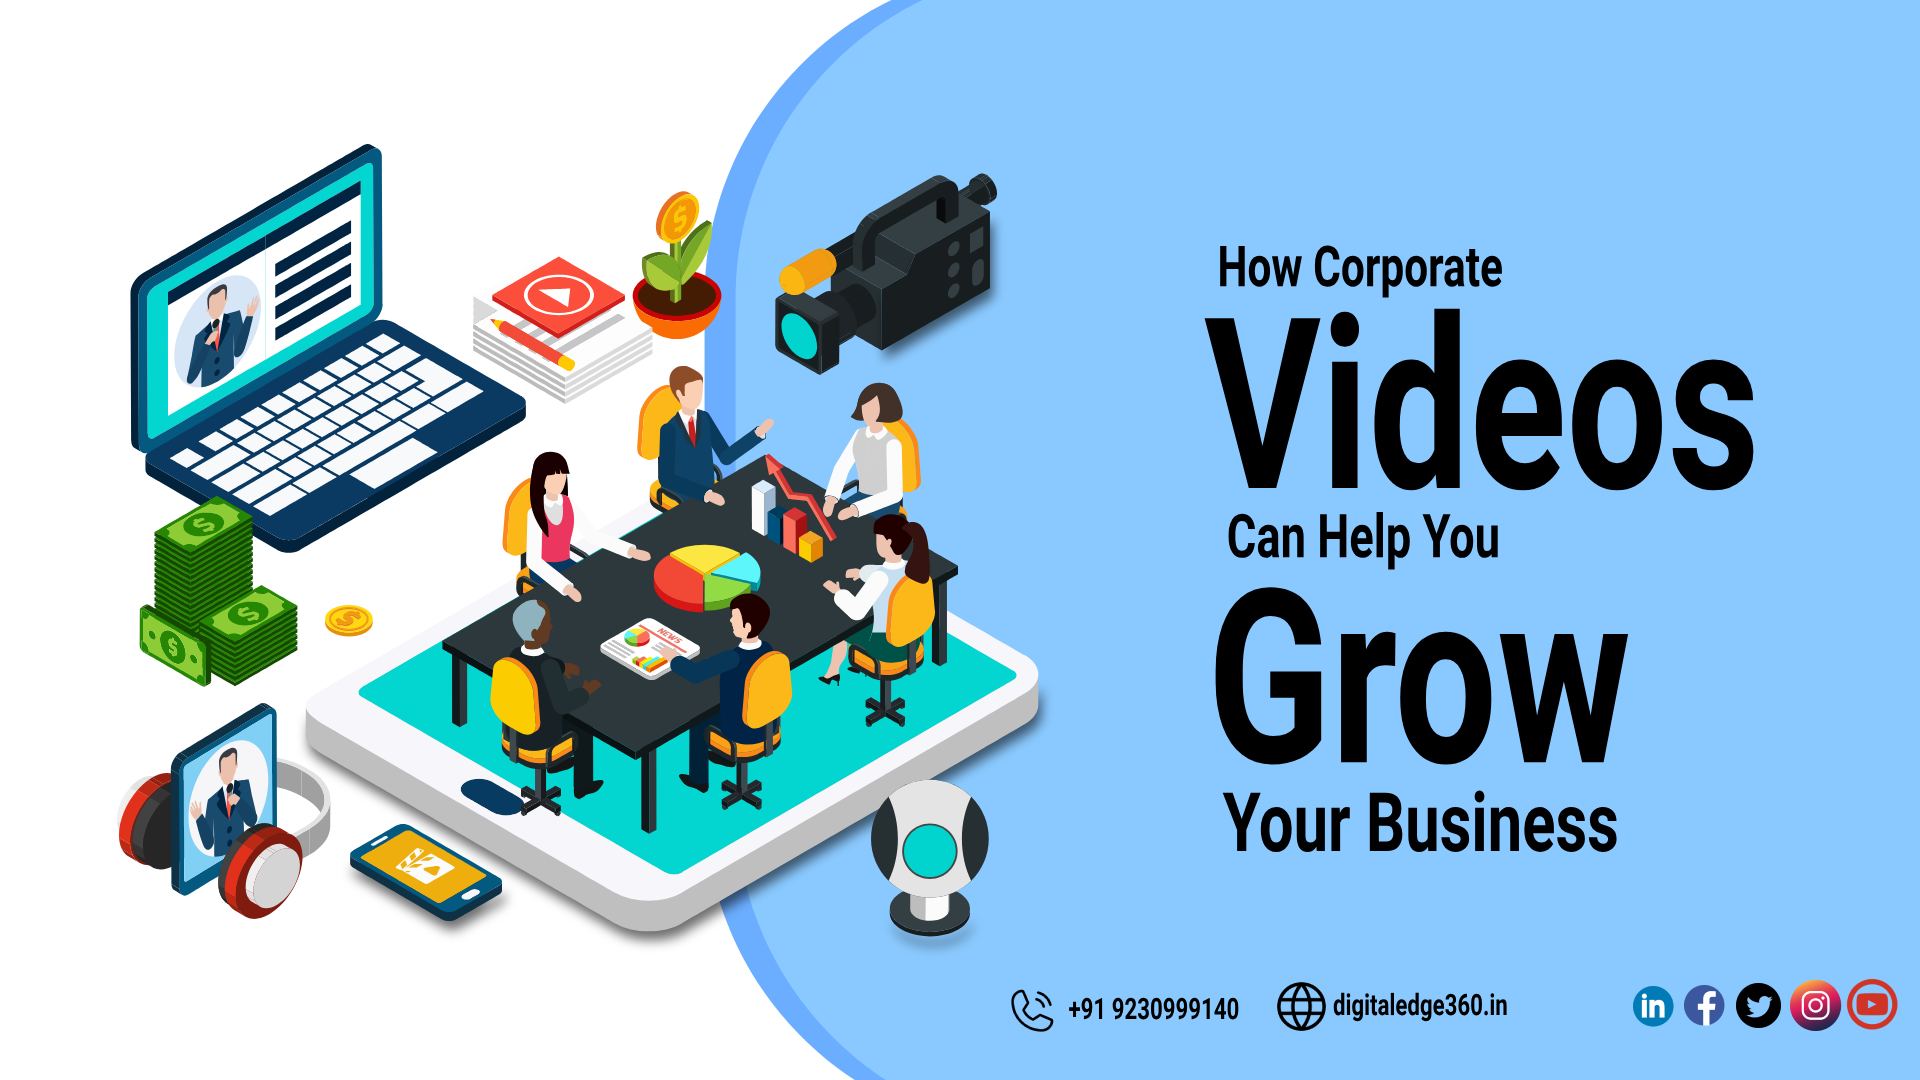 How Corporate Videos Can Help You Grow Your Business?